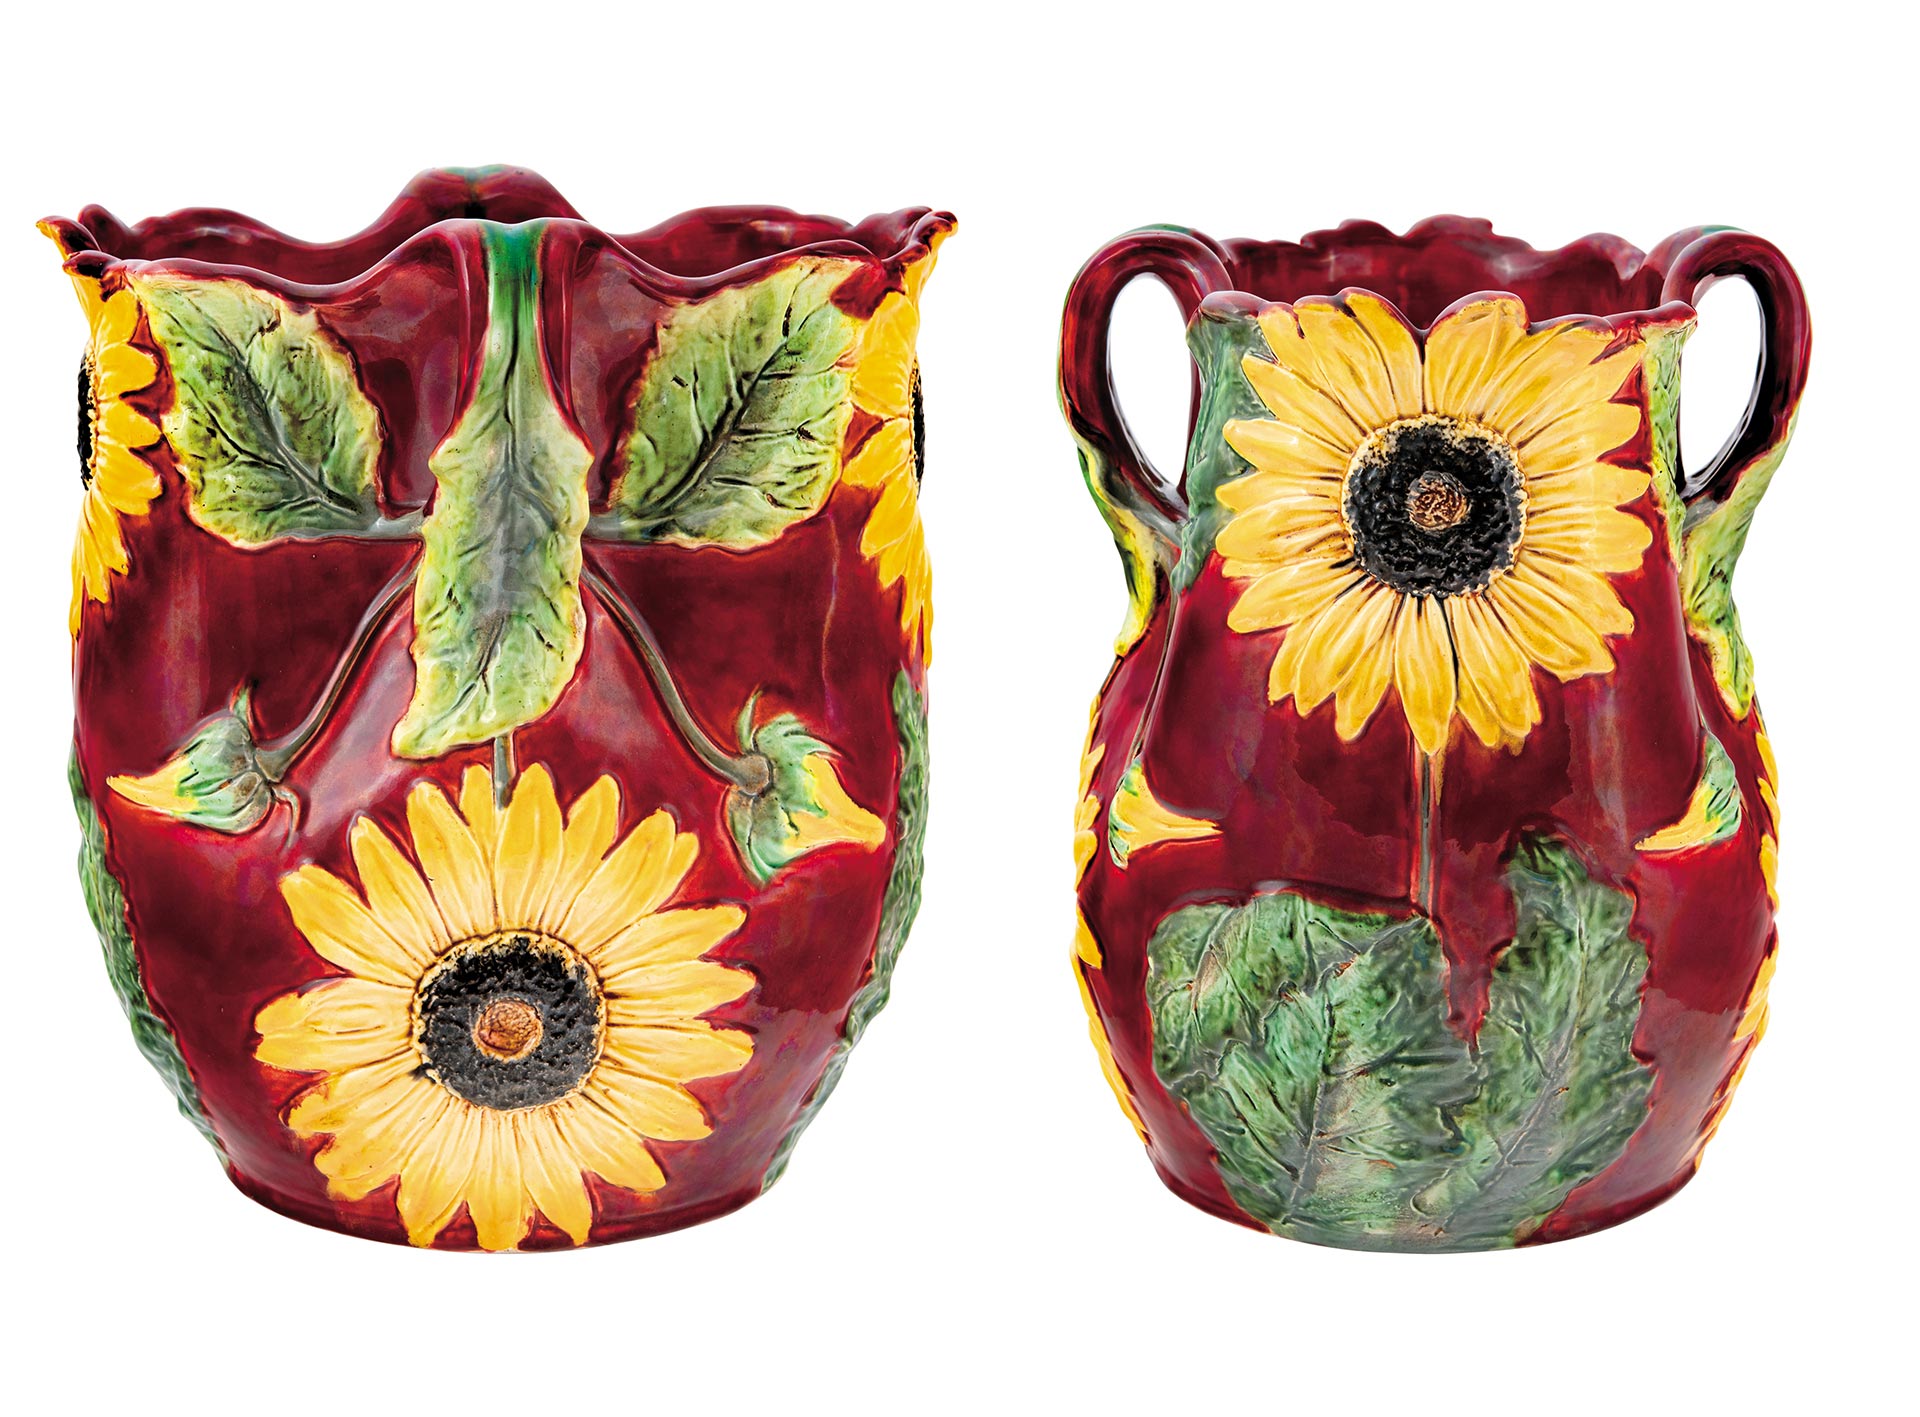 Zsolnay Plant-holder with two Handles and Sculpturesque Sunflower decor, 1898-99